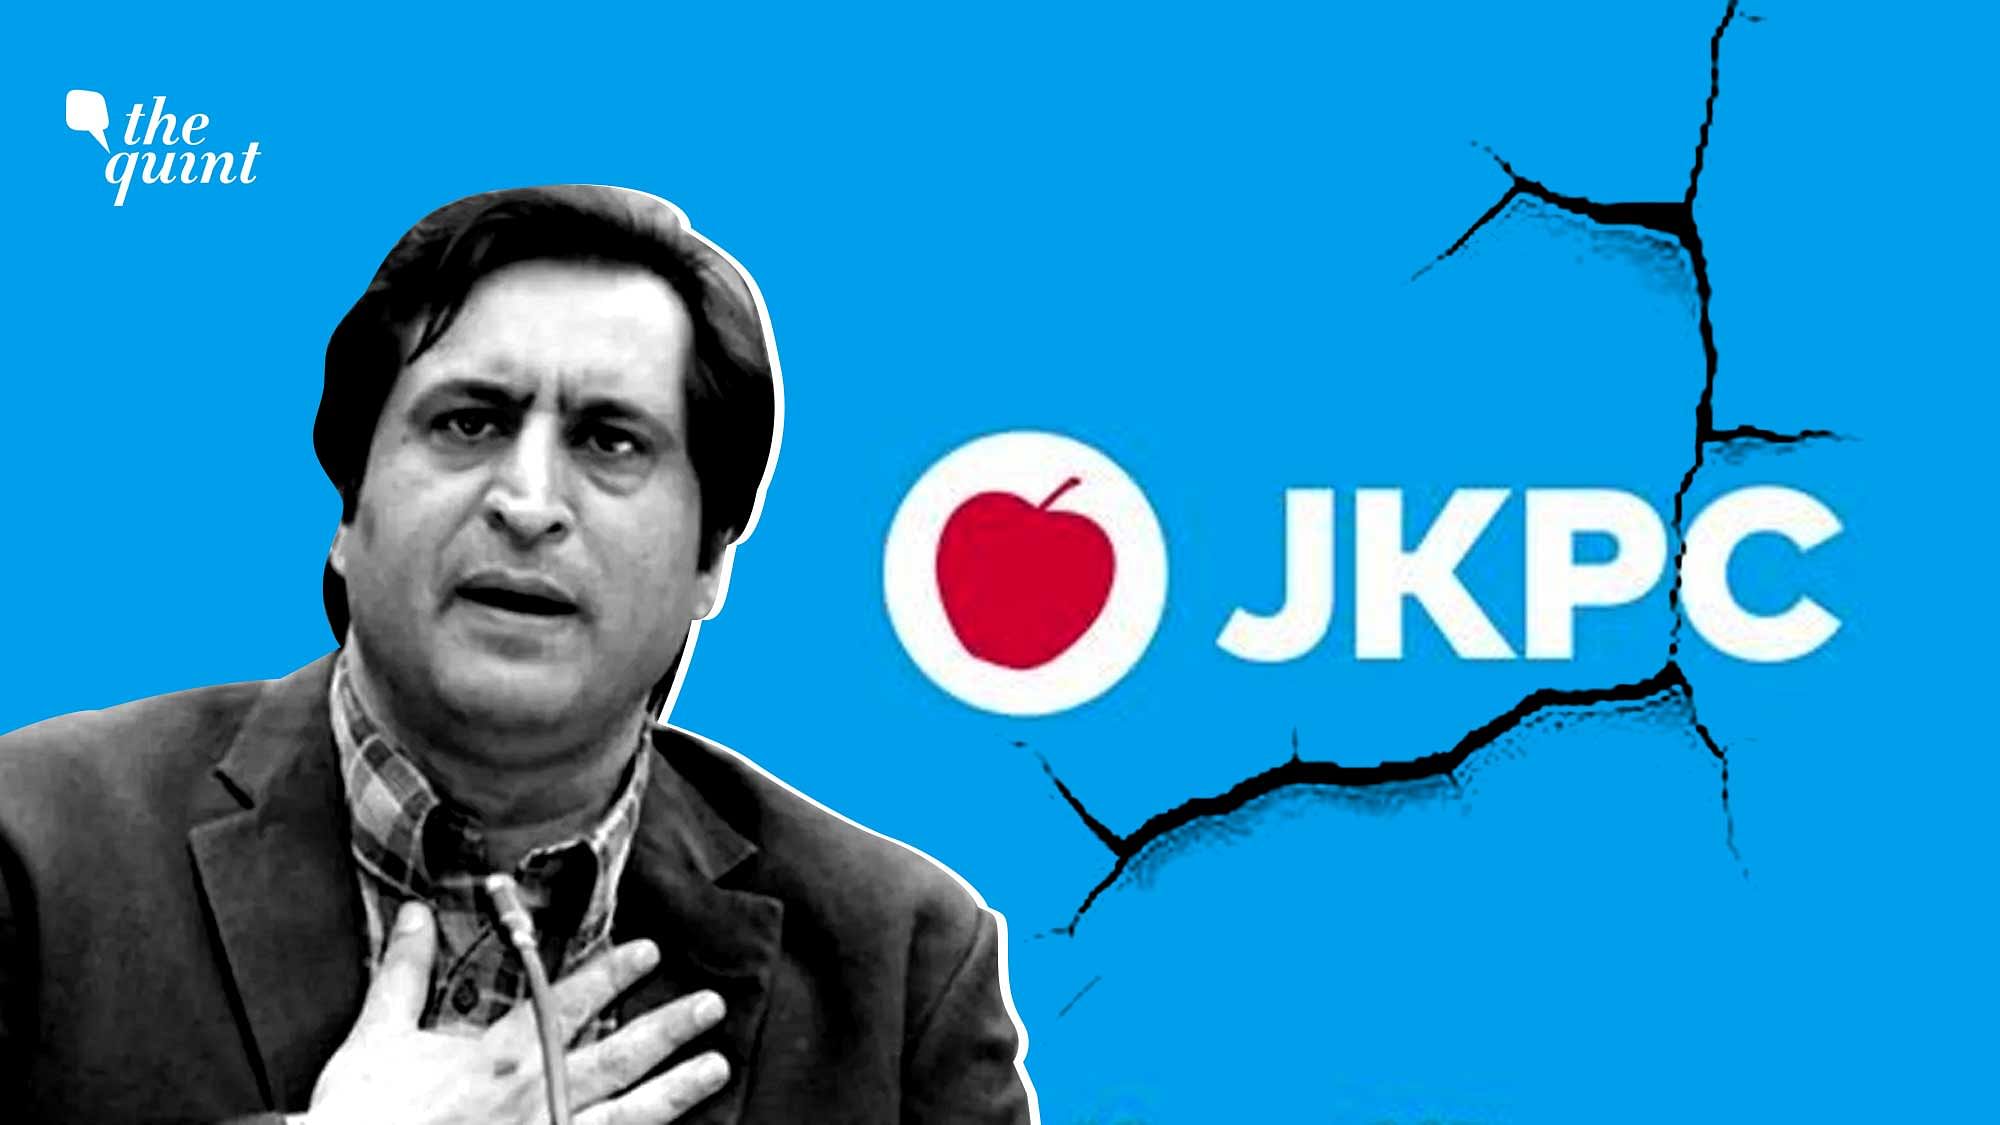  Image of J&amp;K politician Sajad Lone and his party, the People’s Conference, symbol used for representational purposes.